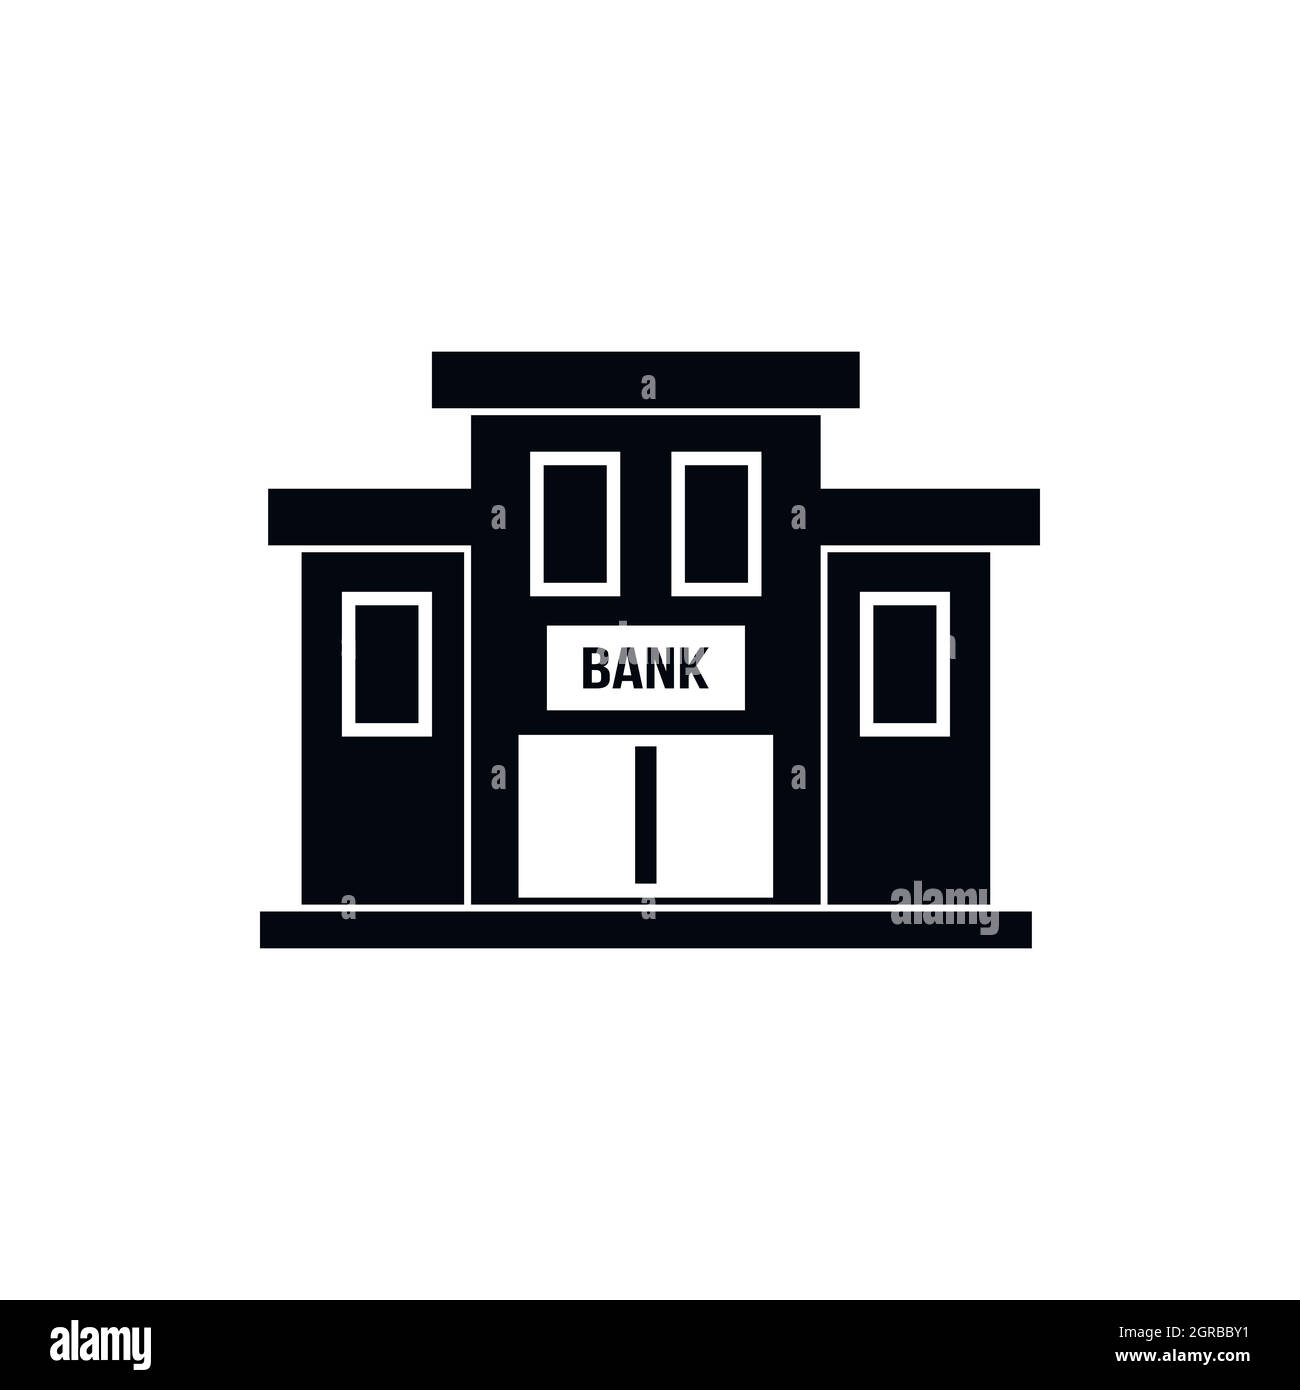 Building of bank. Hand drawn, sketch illustration of bank. | CanStock